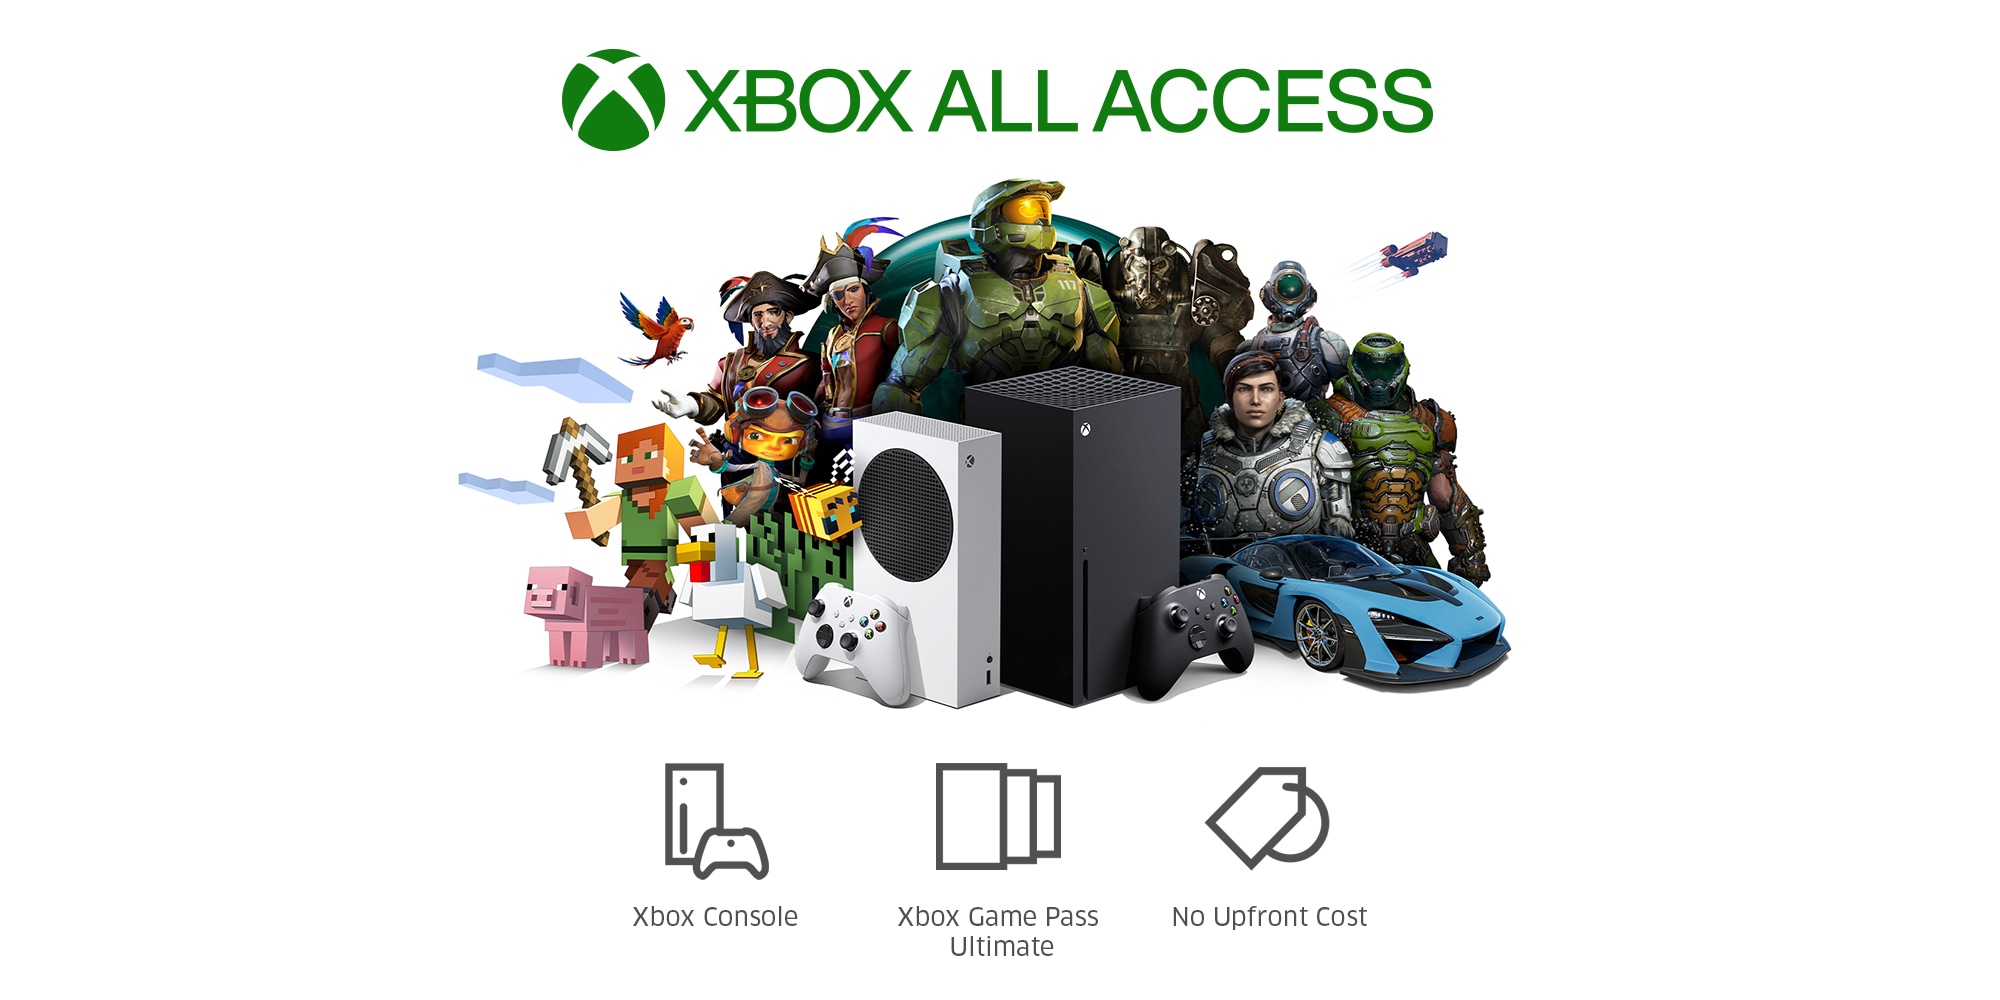 XBOX ALL ACCESS   Xbox Console Xbox Game Pass Ultimate No Upfront Cost